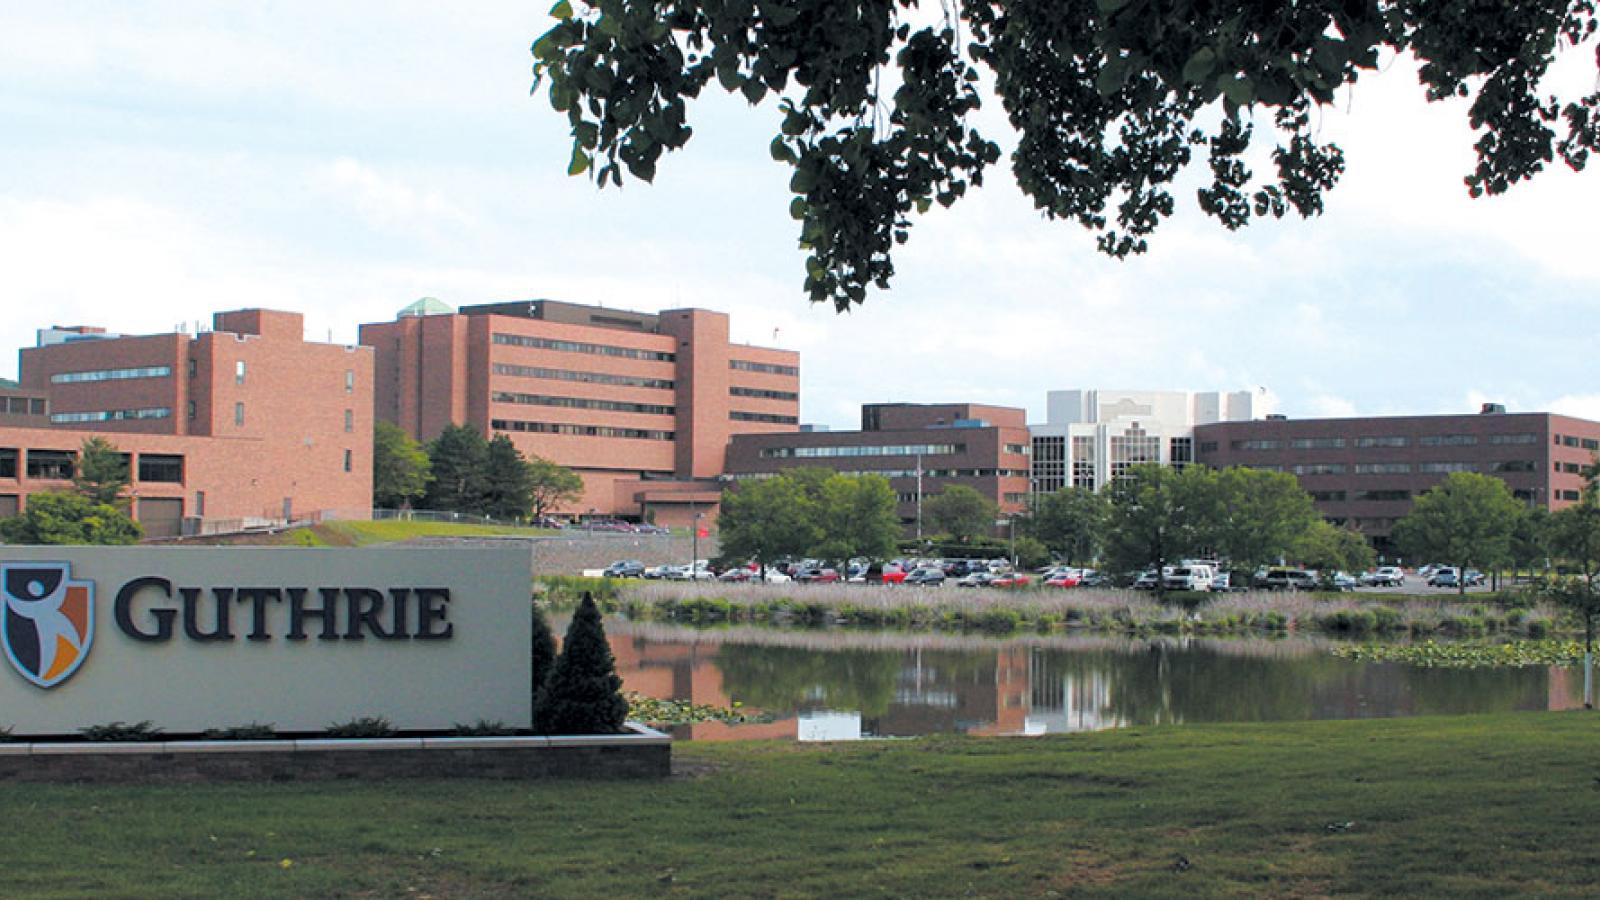 Guthrie sign with campus in the background 